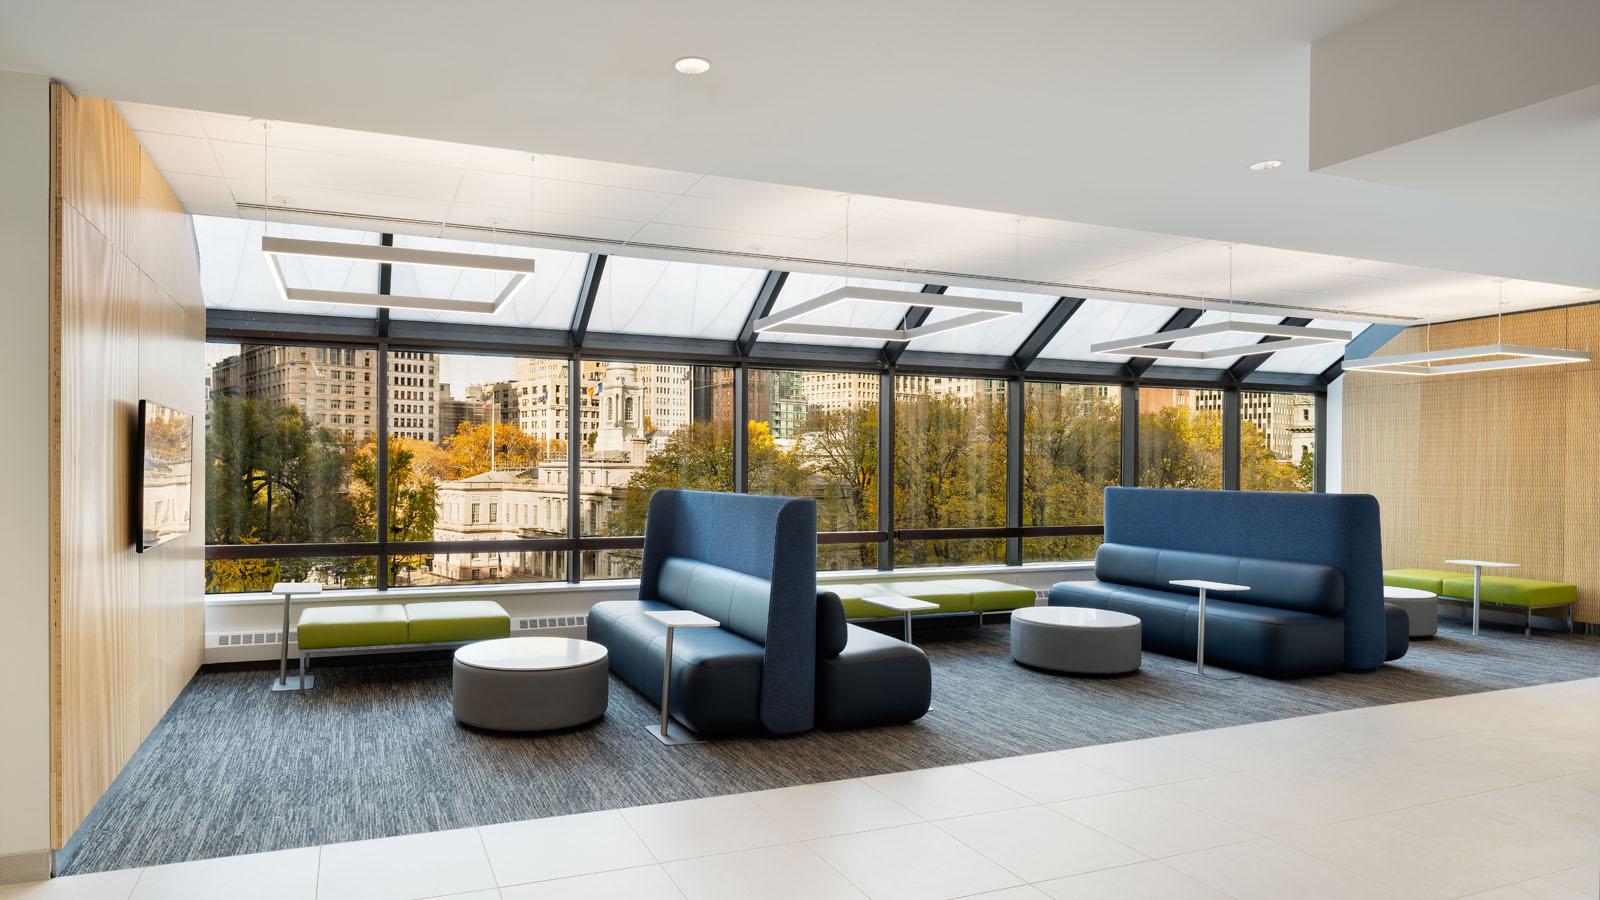 A dedicated study area for Lubin students features plenty of seating and sweeping views of Manhattan.